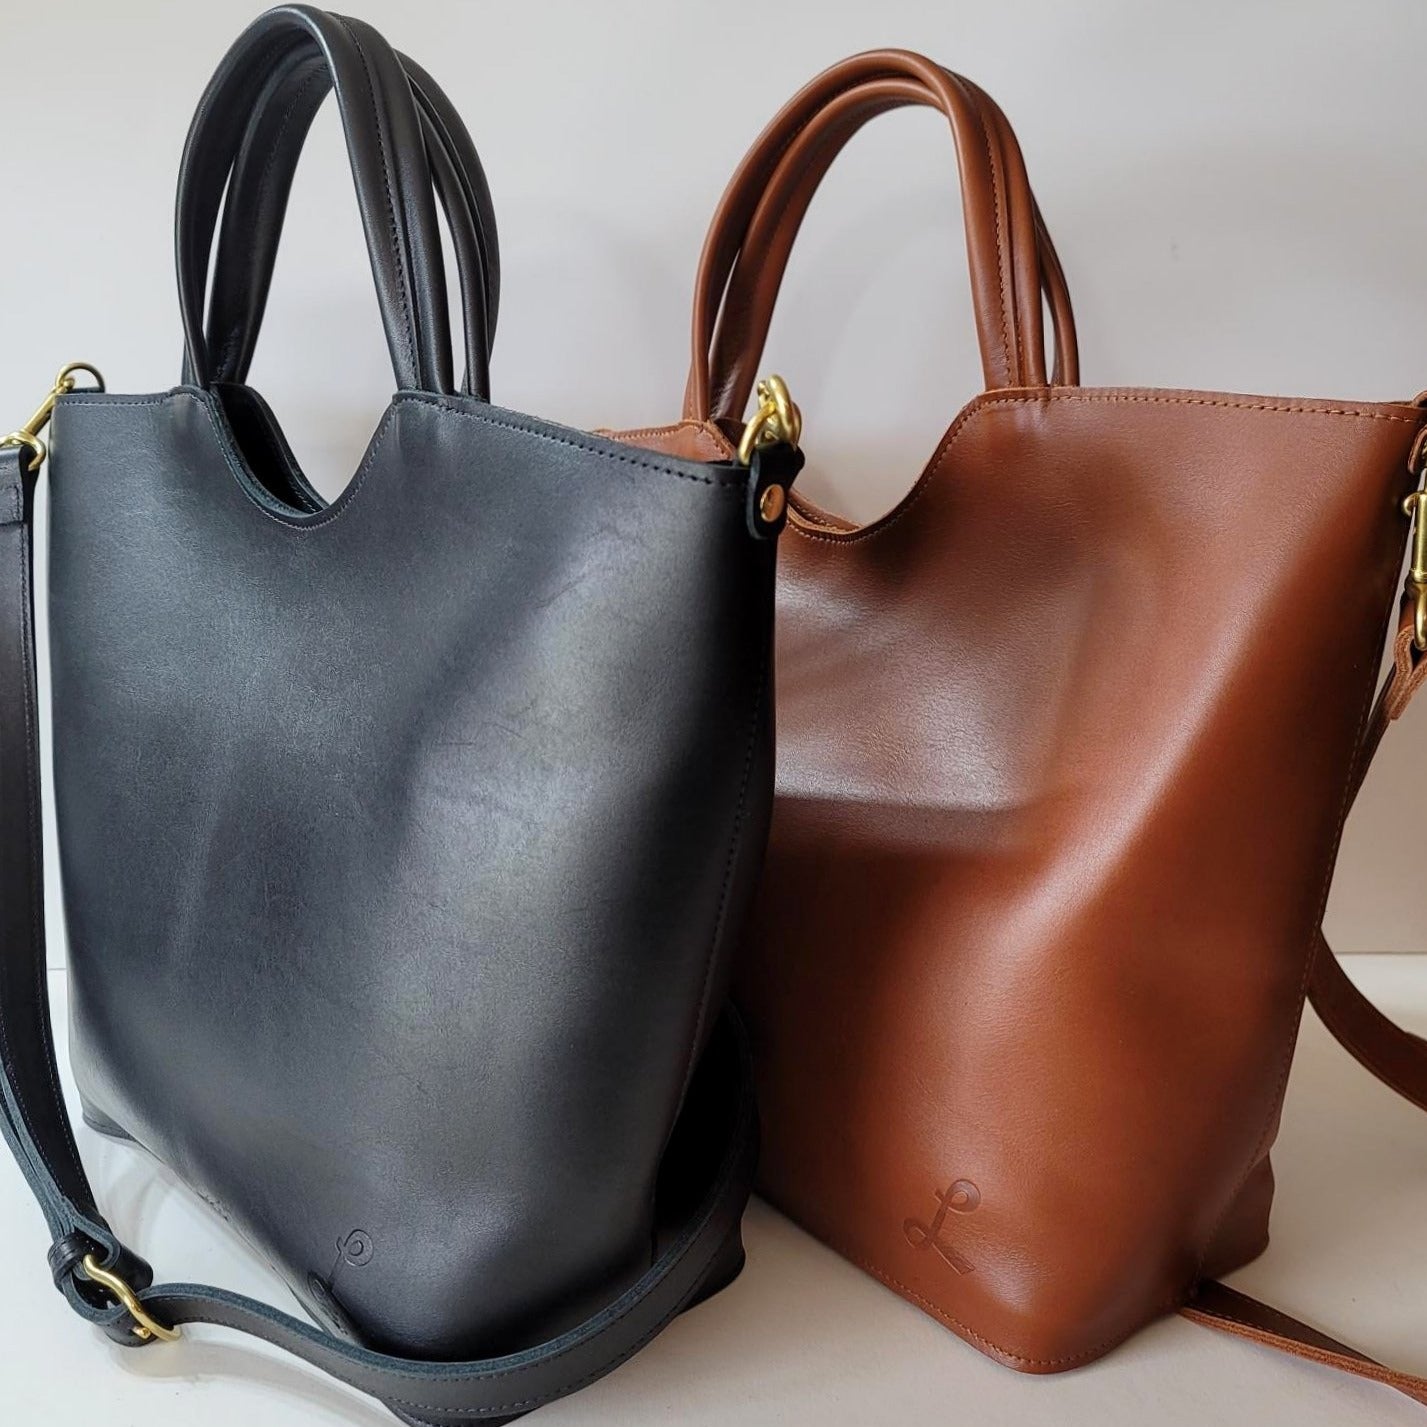 Lund Leather Goods